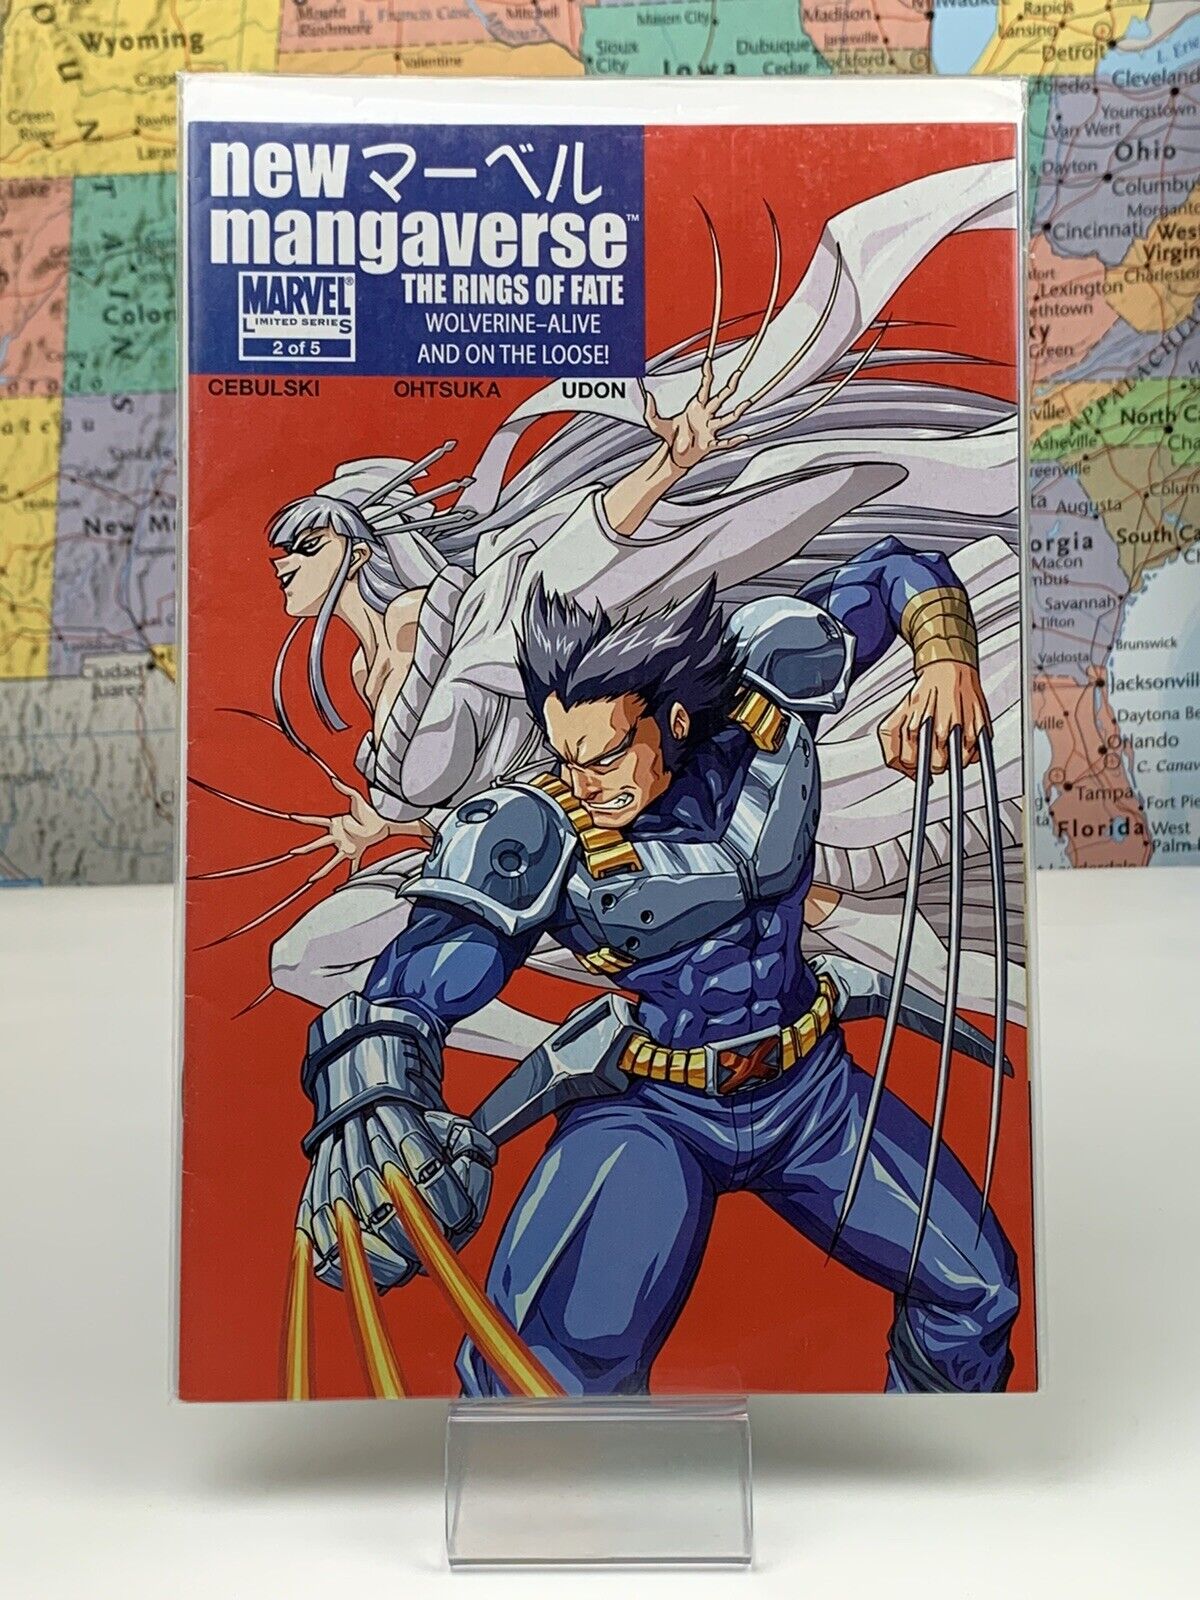 SHIPS SAME DAY New Mangaverse #2 The Rings Of Fate Wolverine-Alive And FN 2006